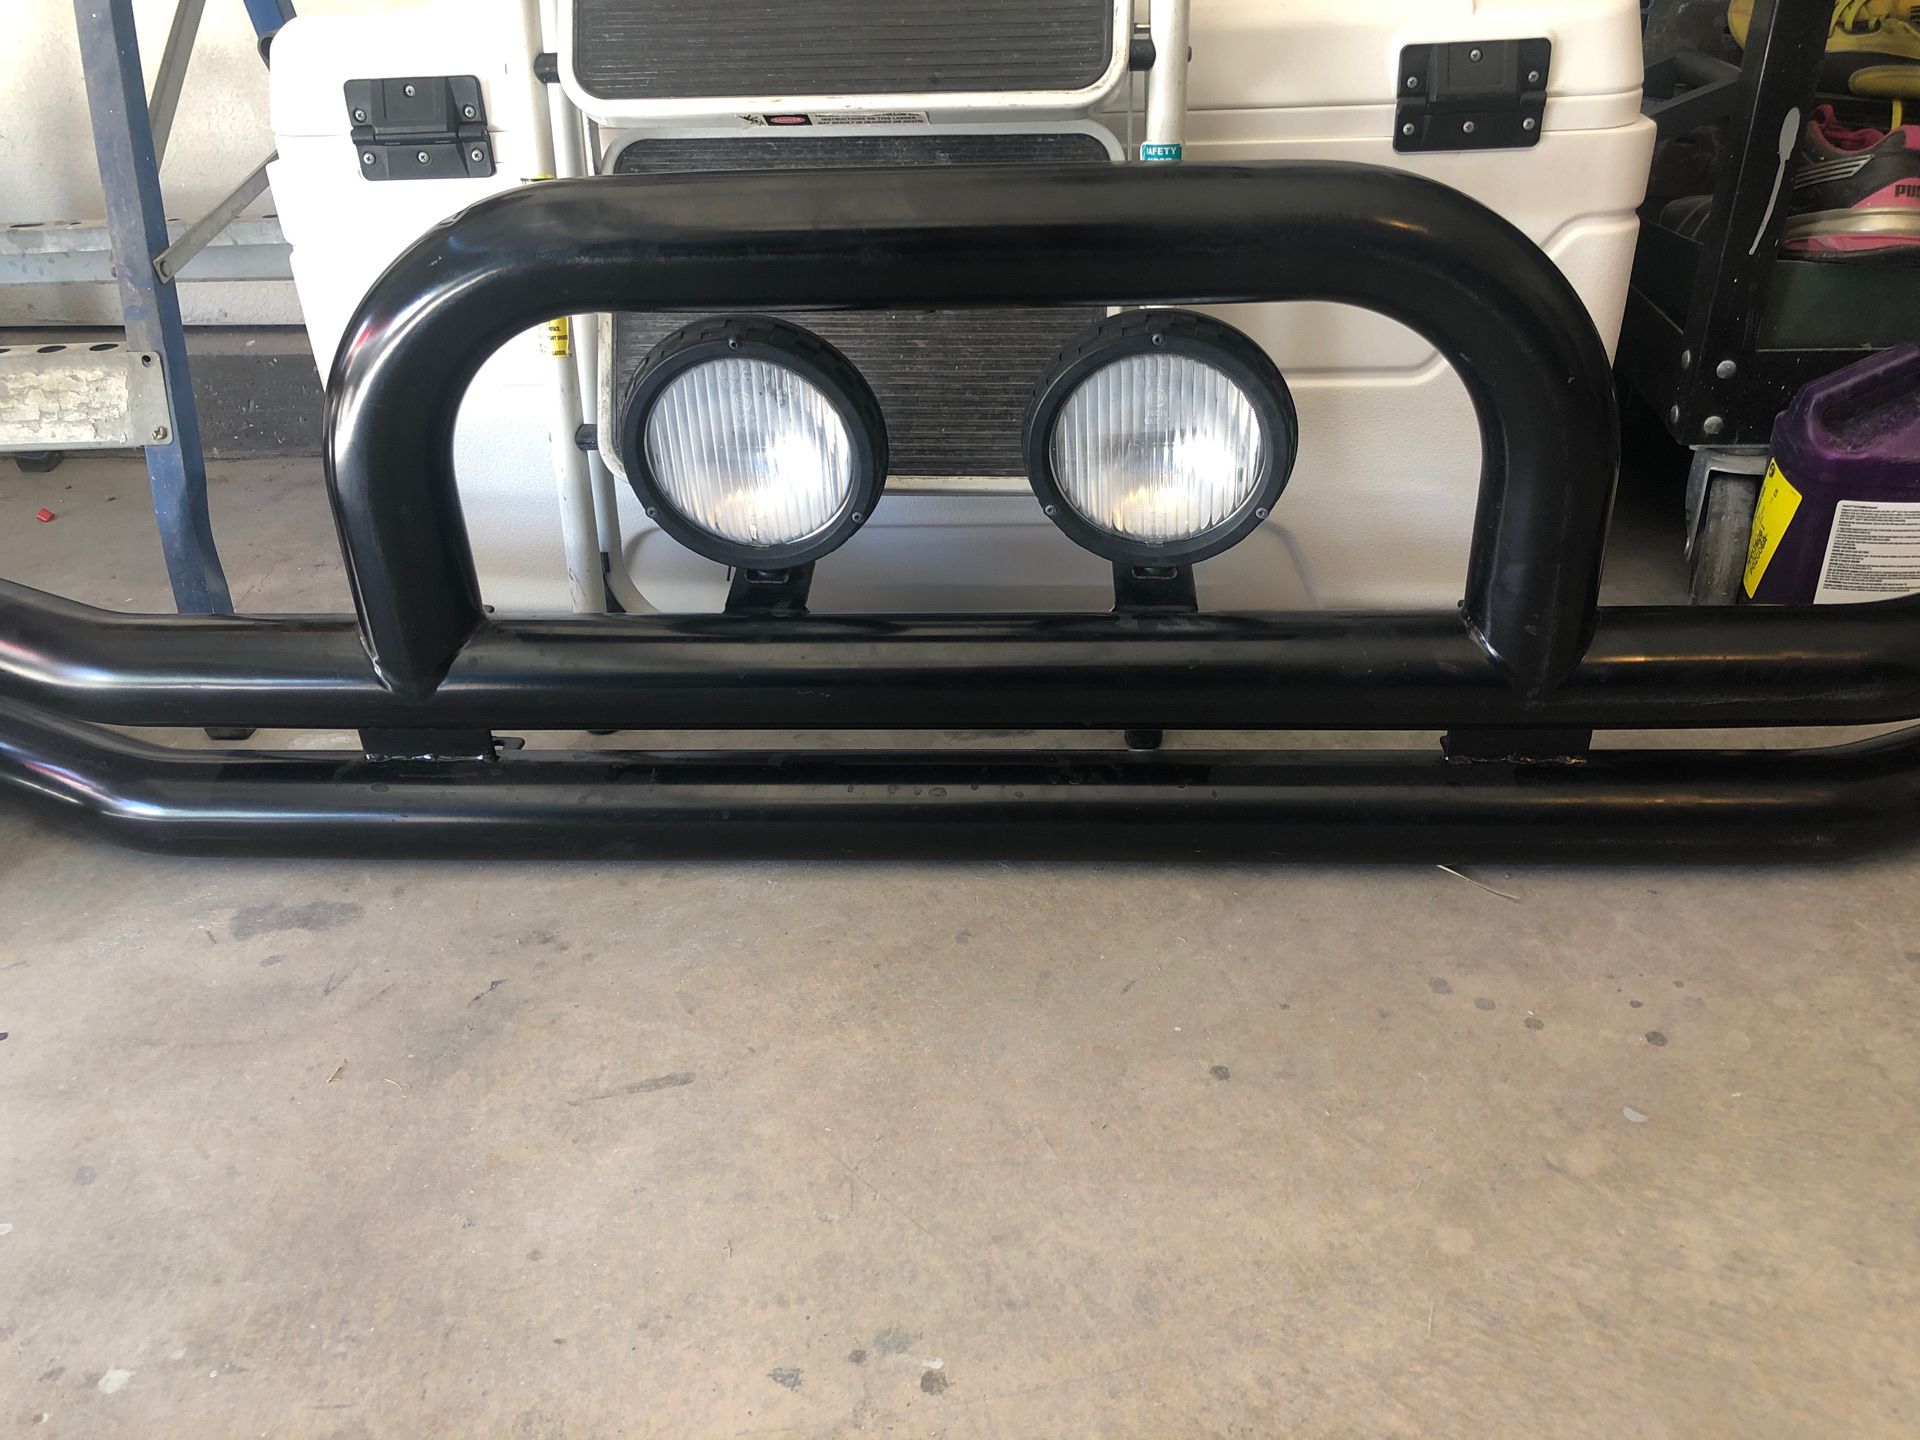 Jeep Wrangler frame with out lights for Sale in Las Vegas, NV - OfferUp